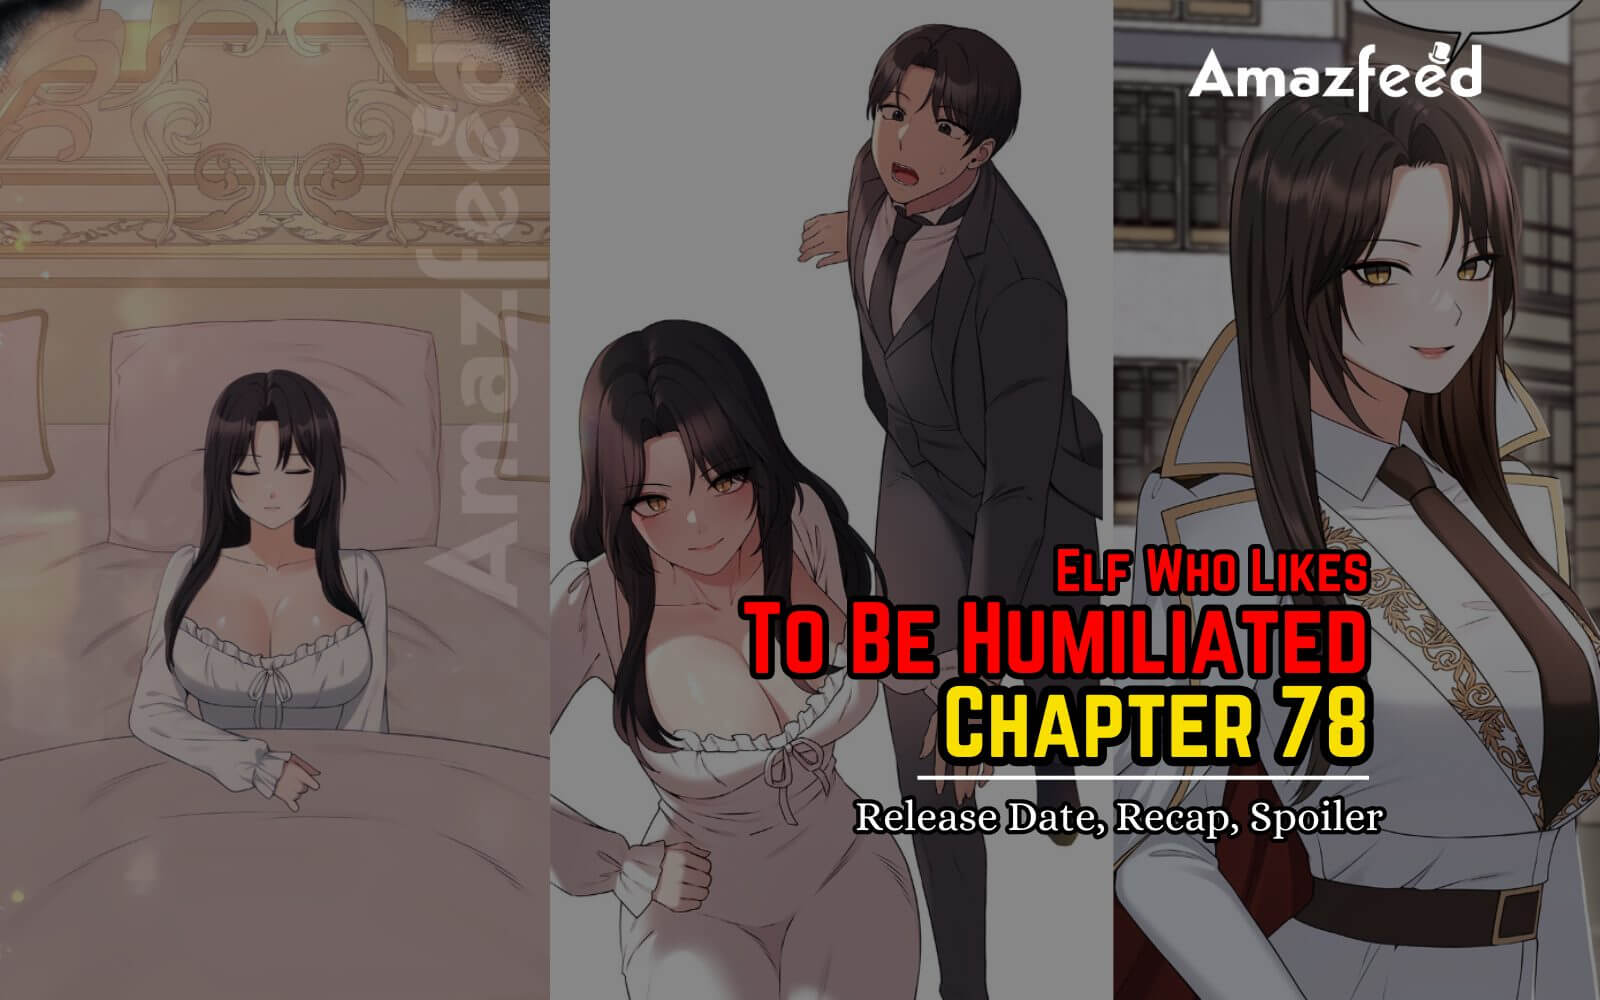 Elf Who Likes To Be Humiliated Chapter 78 Release Date